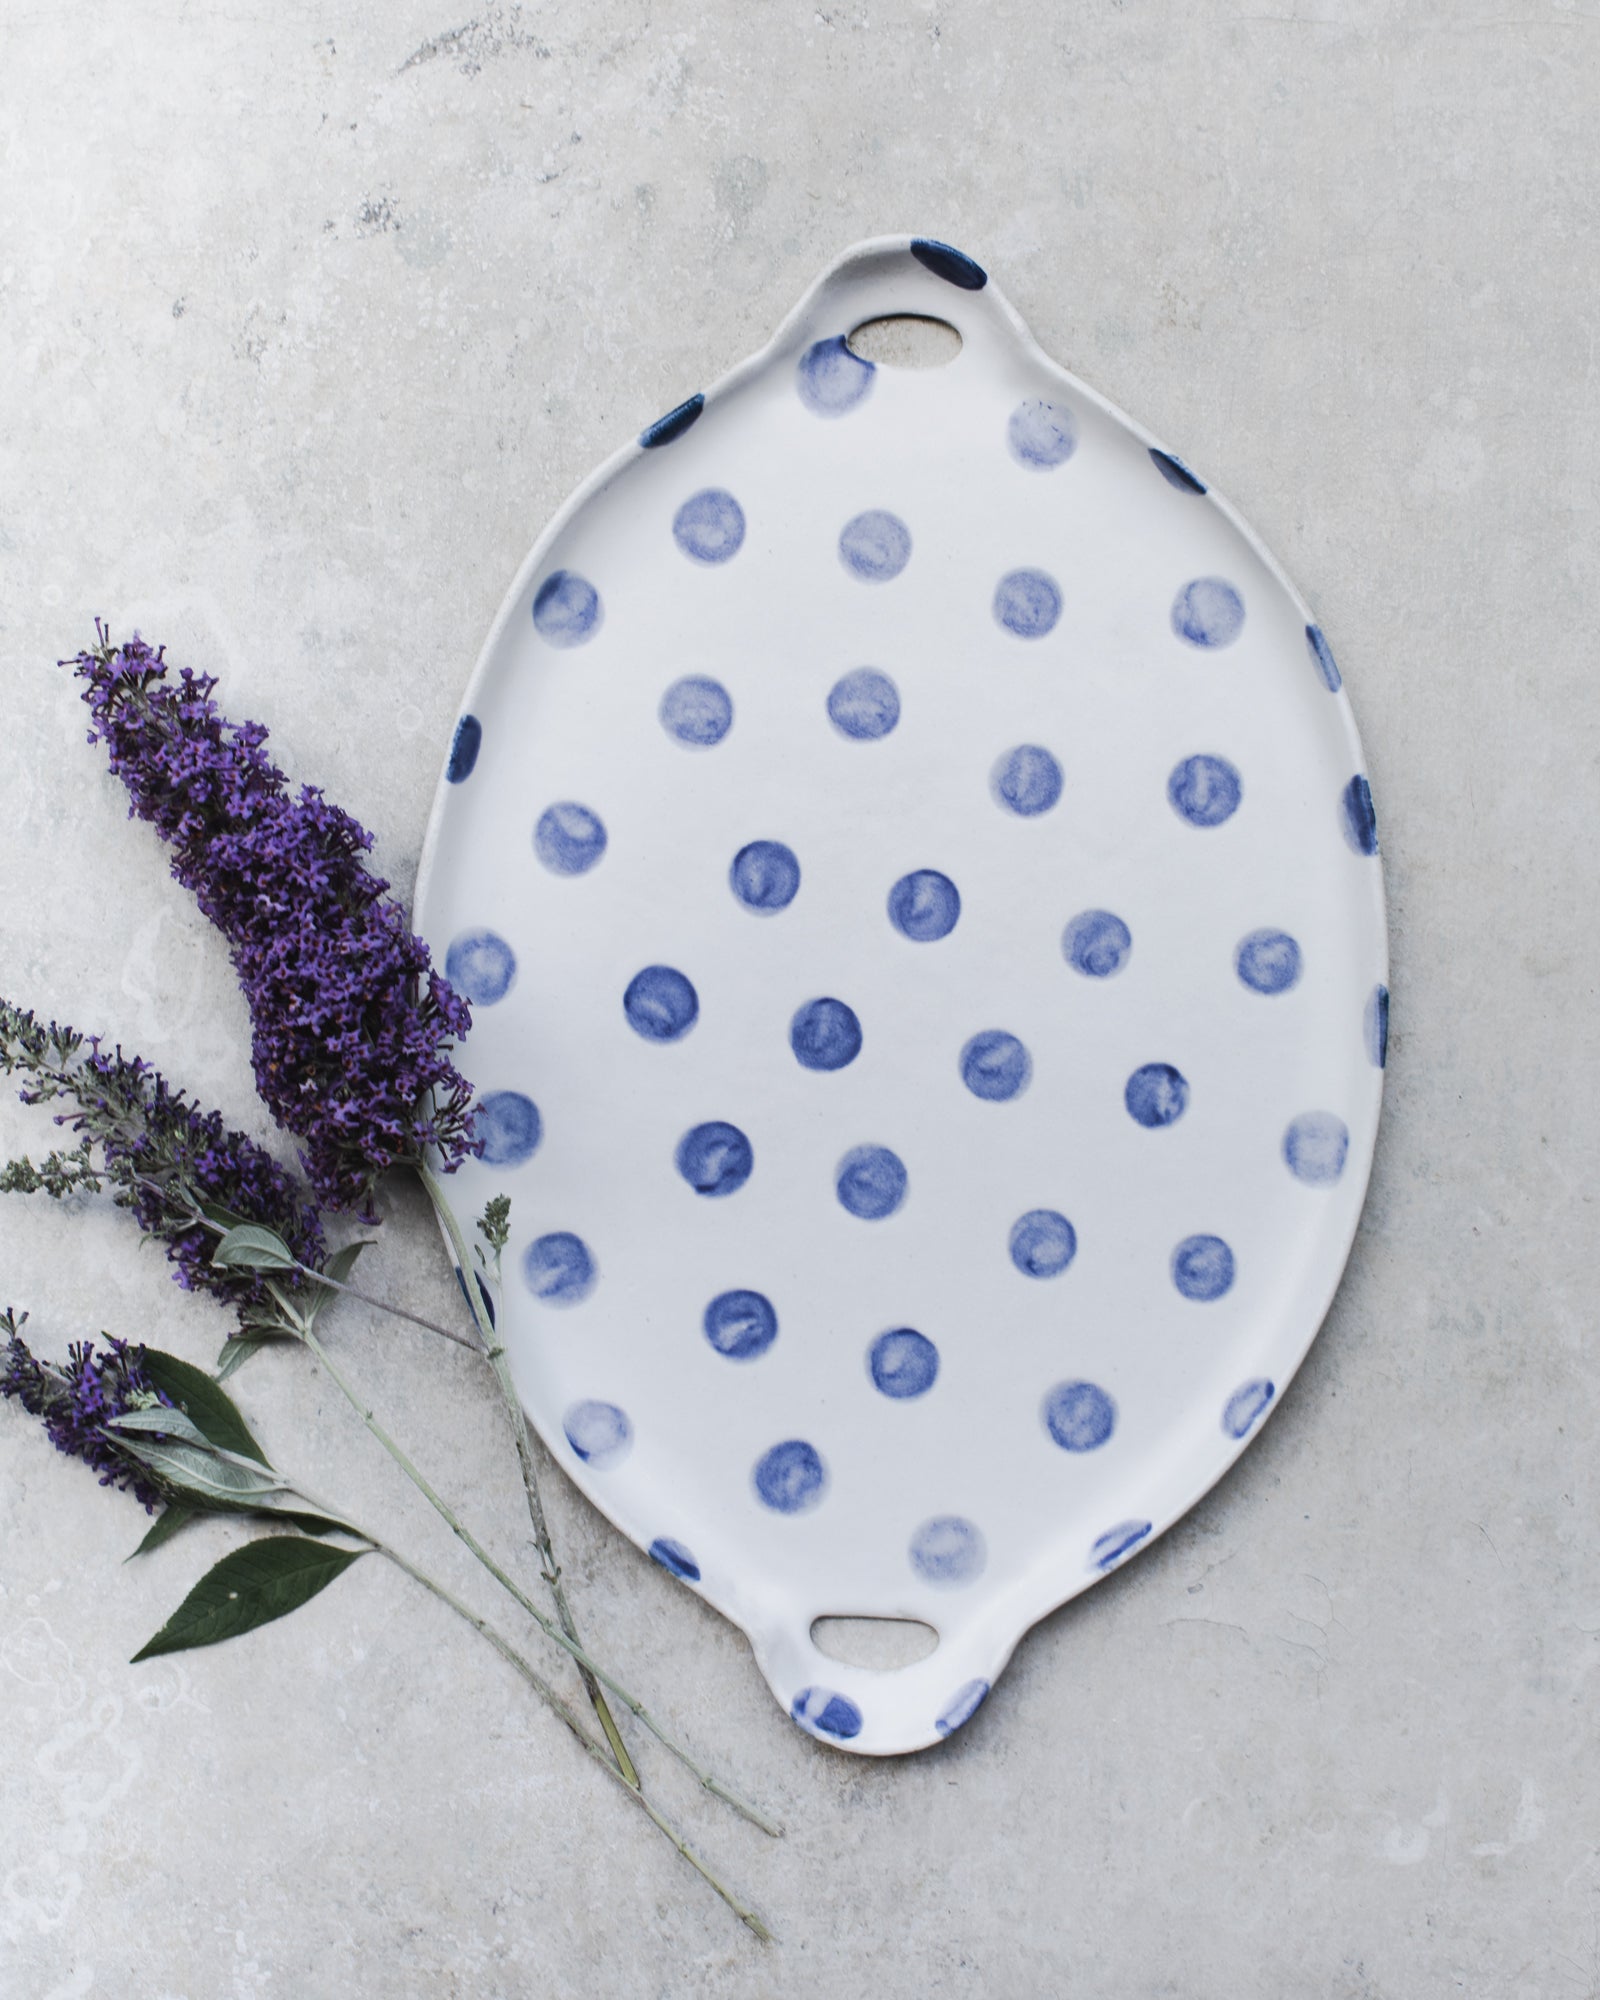 Large handled polka dot platter with easy grip handles handmade by clay beehive ceramics